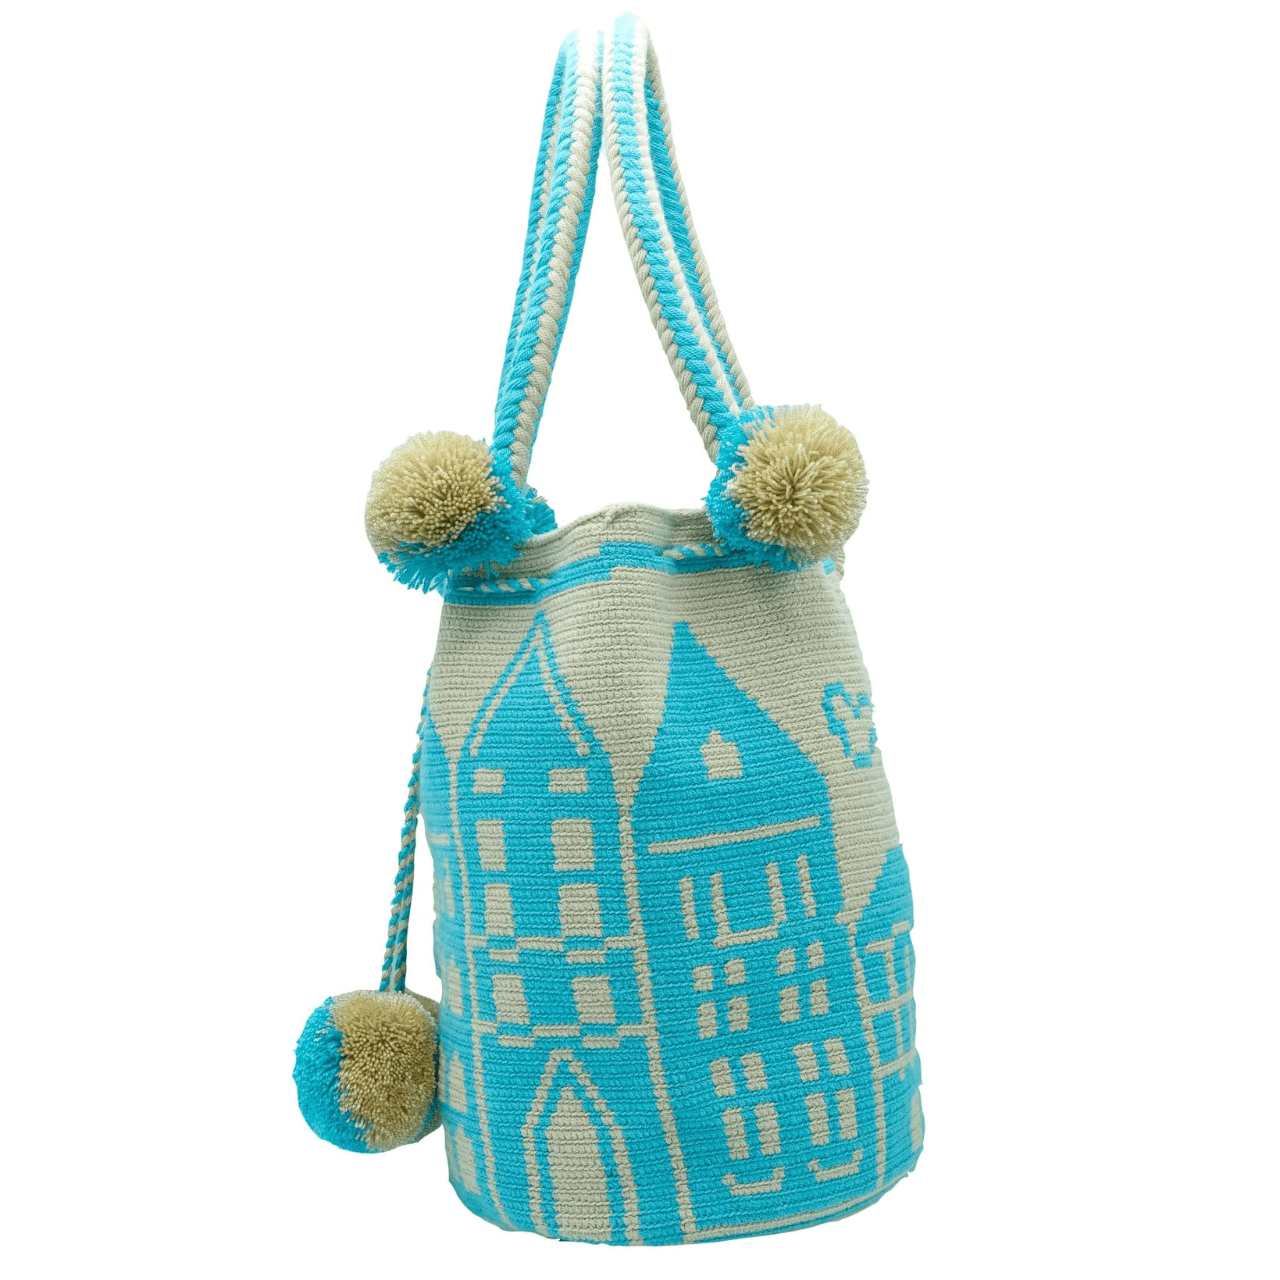 Gala Crochet Tote Bag - Unique Wayuu Style, Inspired by La Guajira, Colombia. Aqua and Beige Colors with Pom Poms. Handcrafted by Expert Wayuu Women Artisans. Large Size, Sturdy & Stylish.